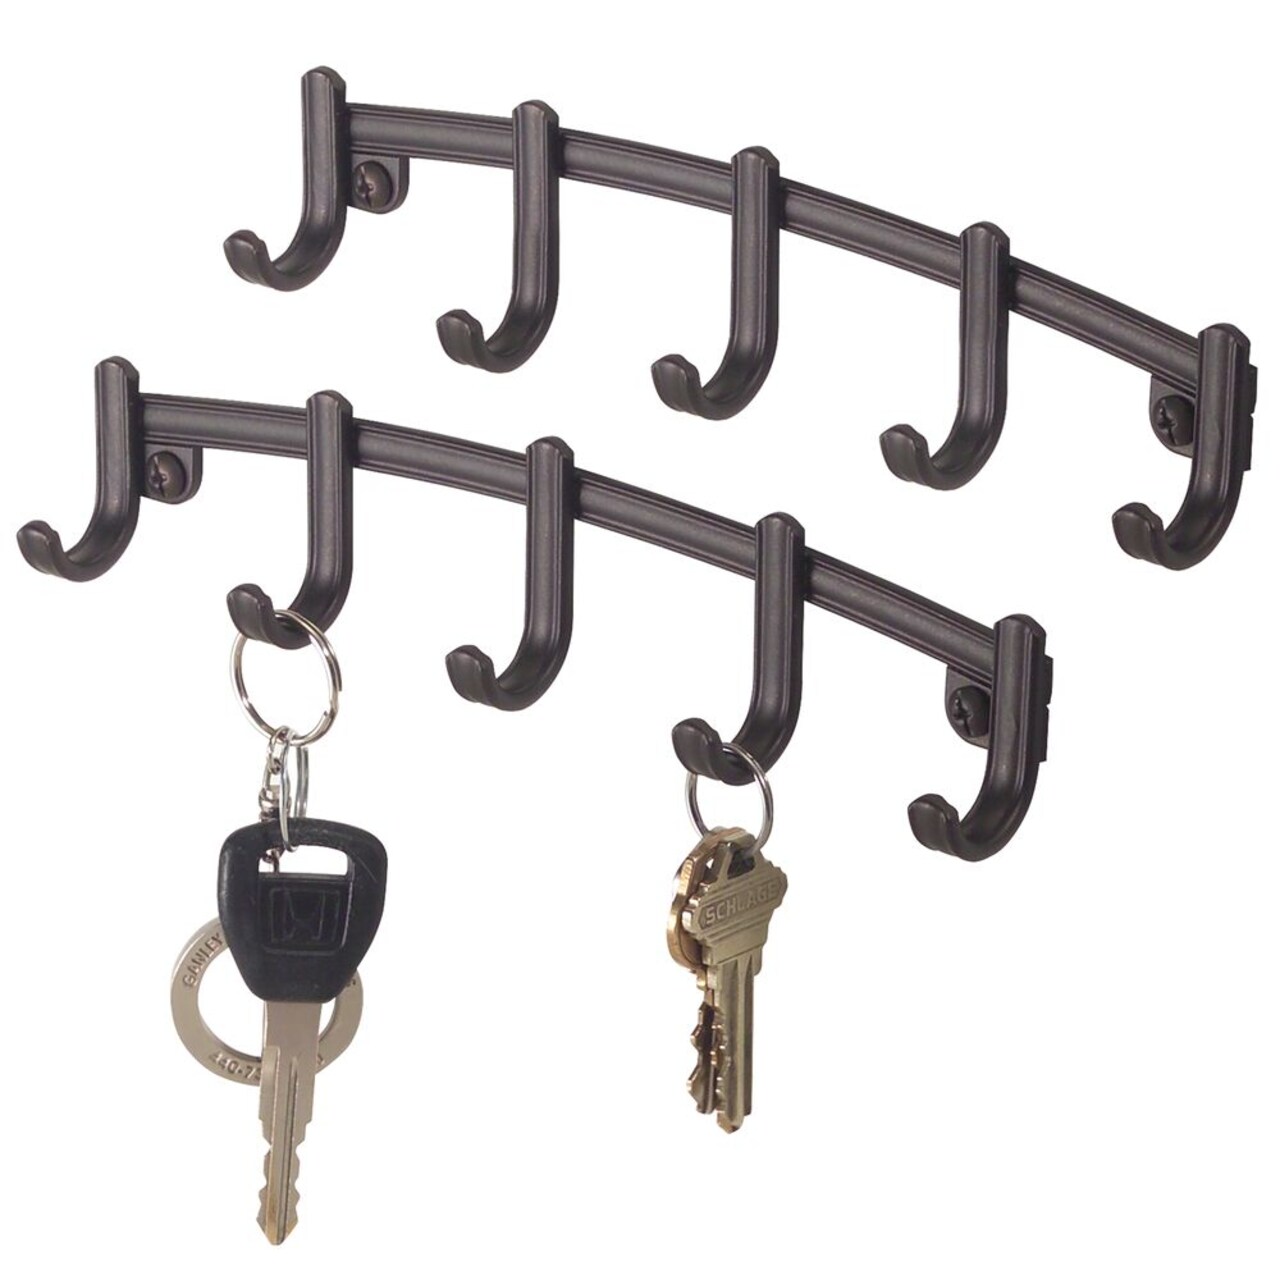 mDesign Small Wall Mount Key Ring Holder Hook Rack with 5 Hooks, 2